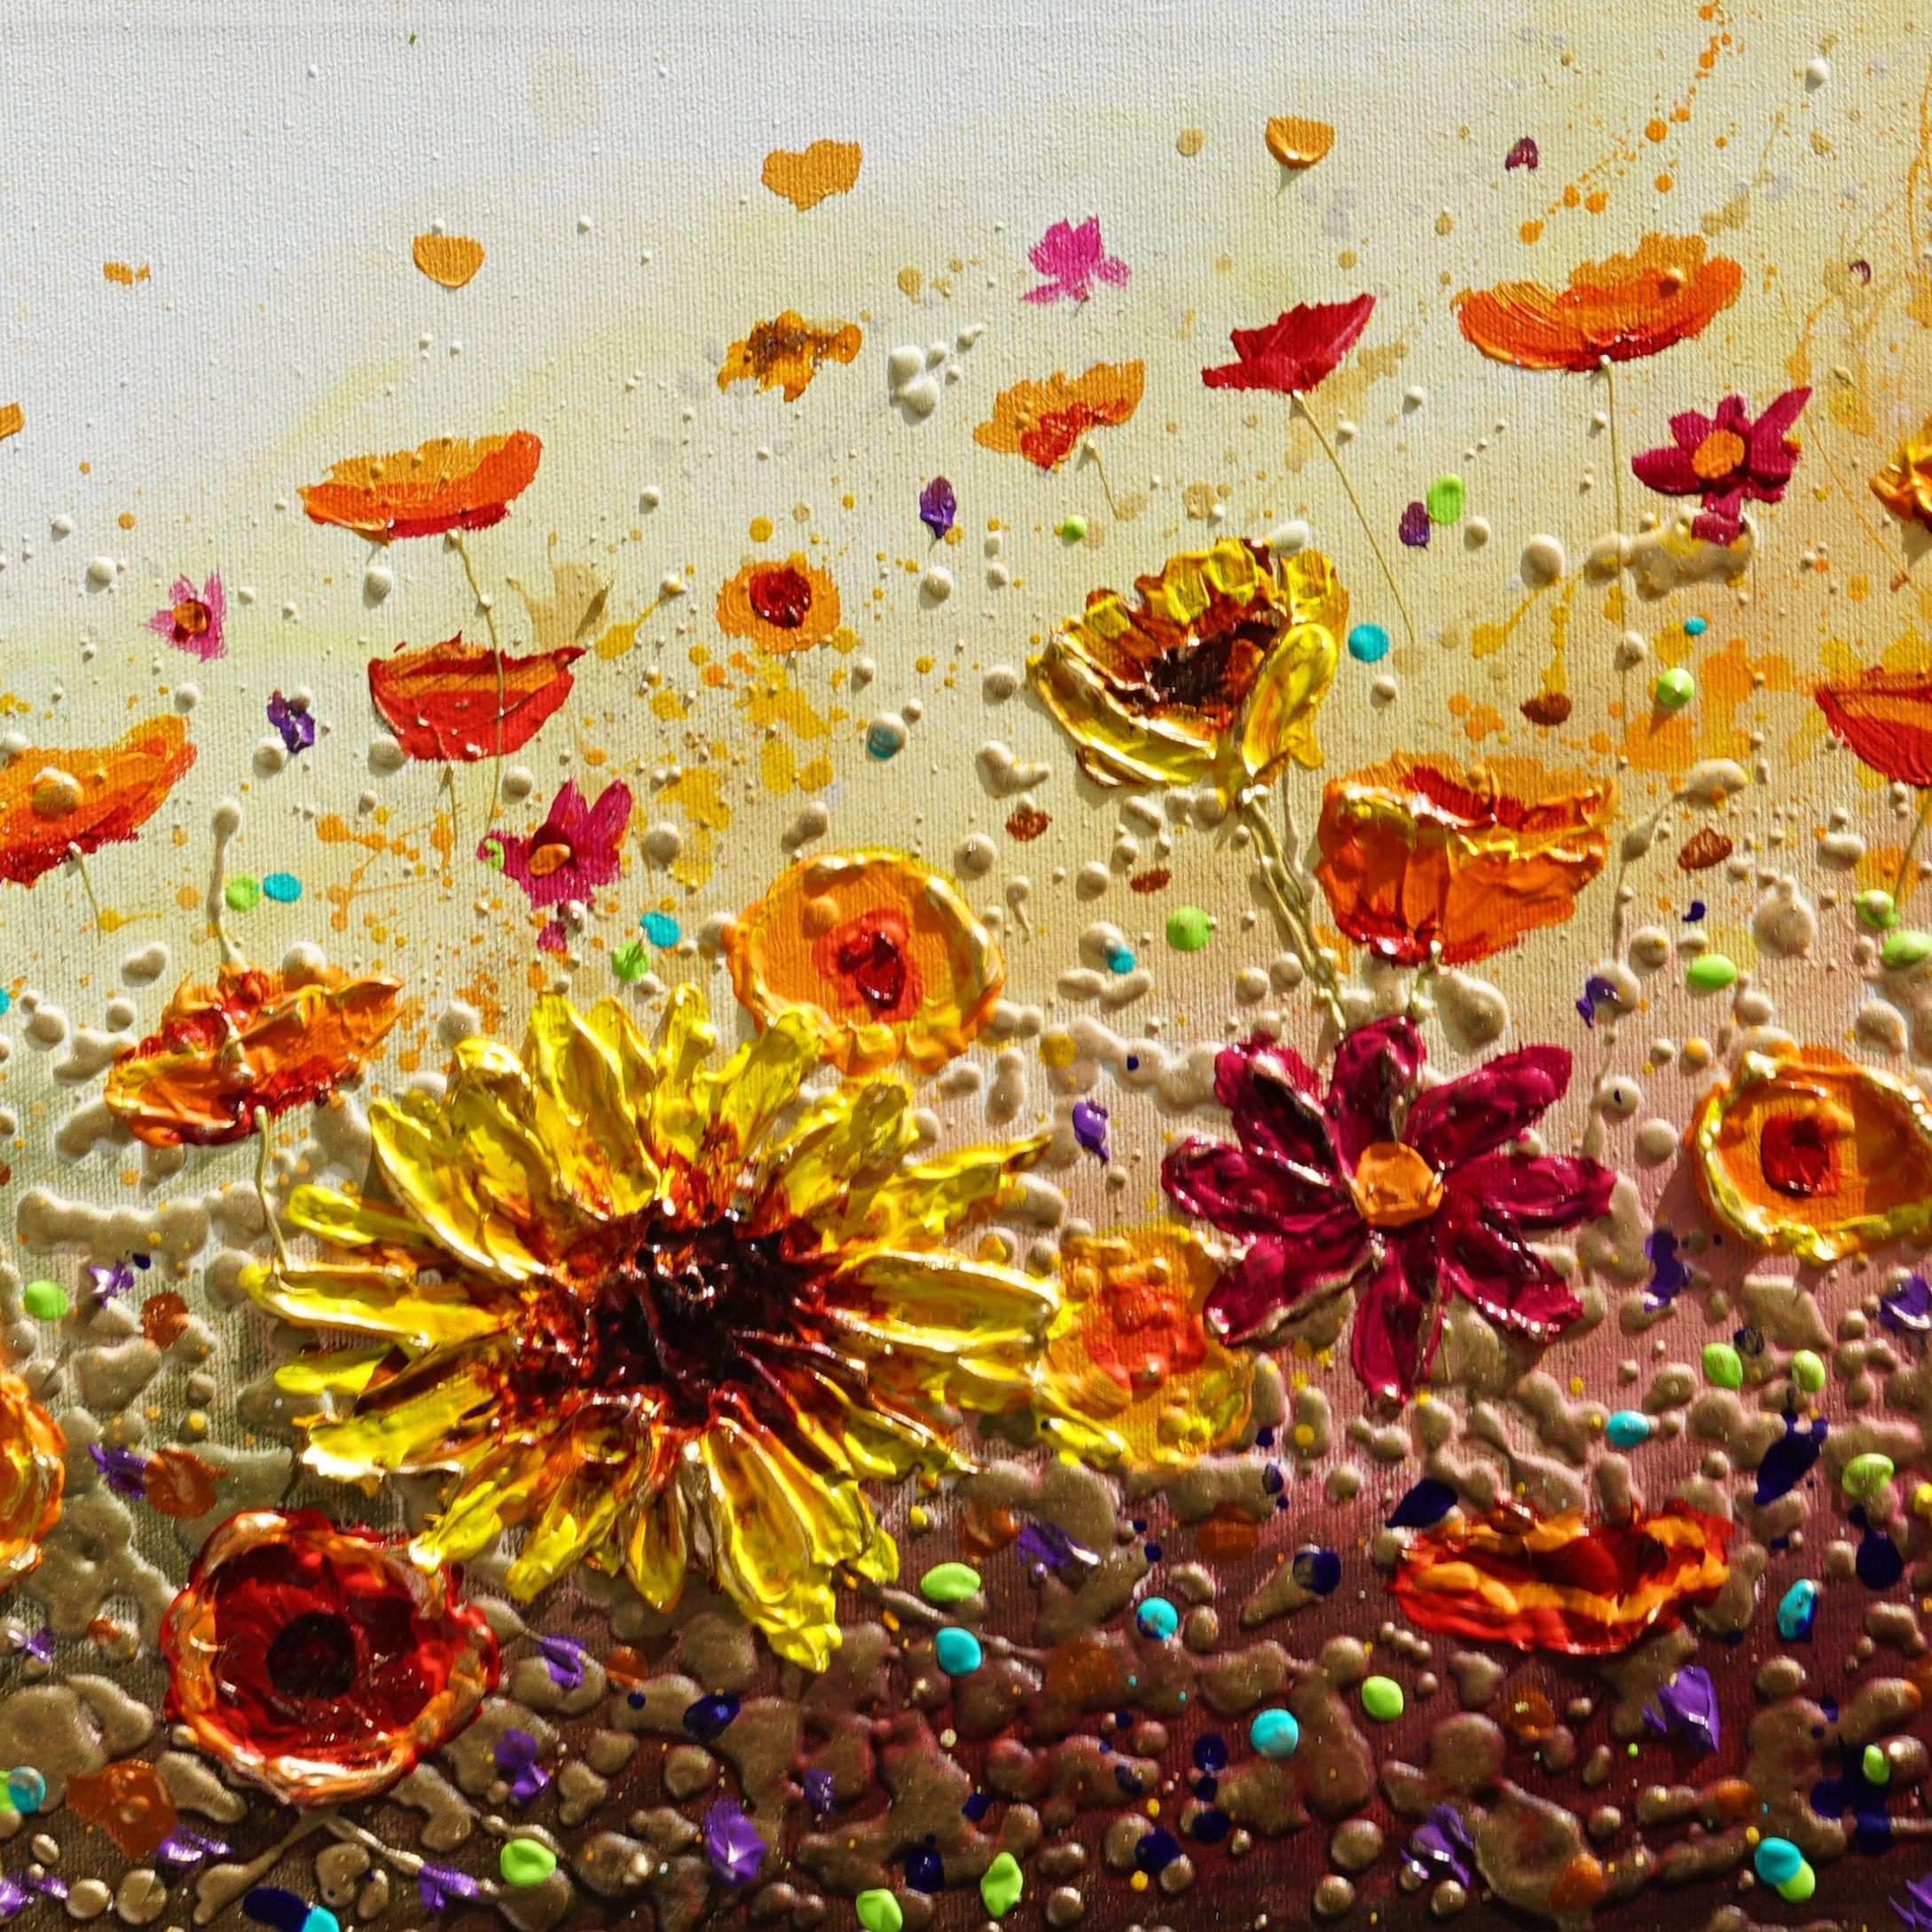 Sunlit Floral, Painting, Acrylic on Canvas 2